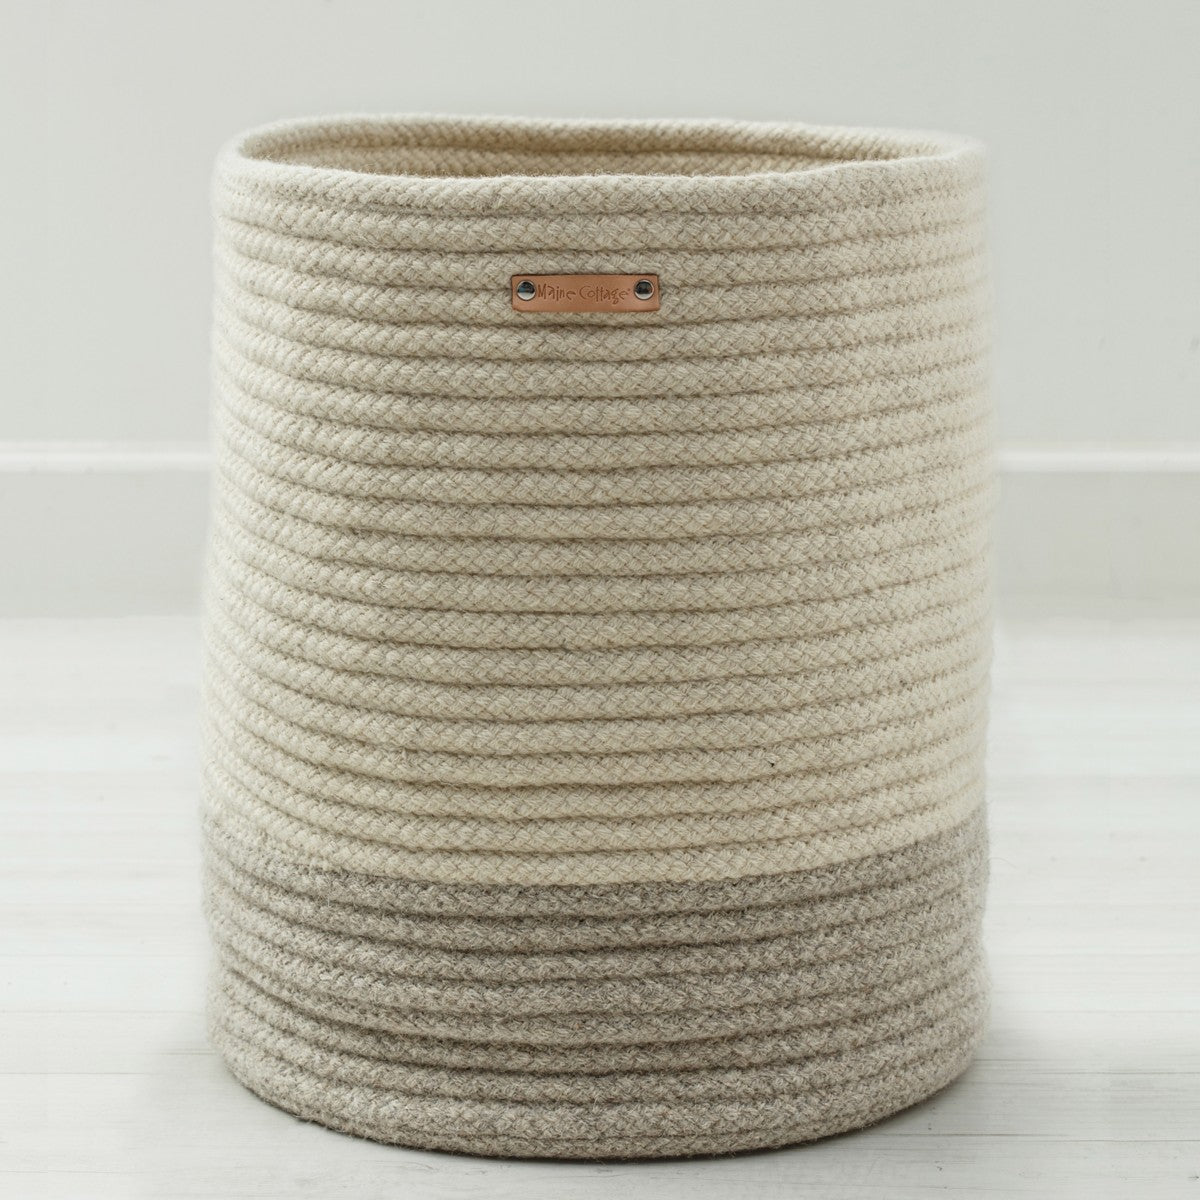 Maine Cottage Braided Wool Basket - Two Tone - Petite | Maine Cottage® 